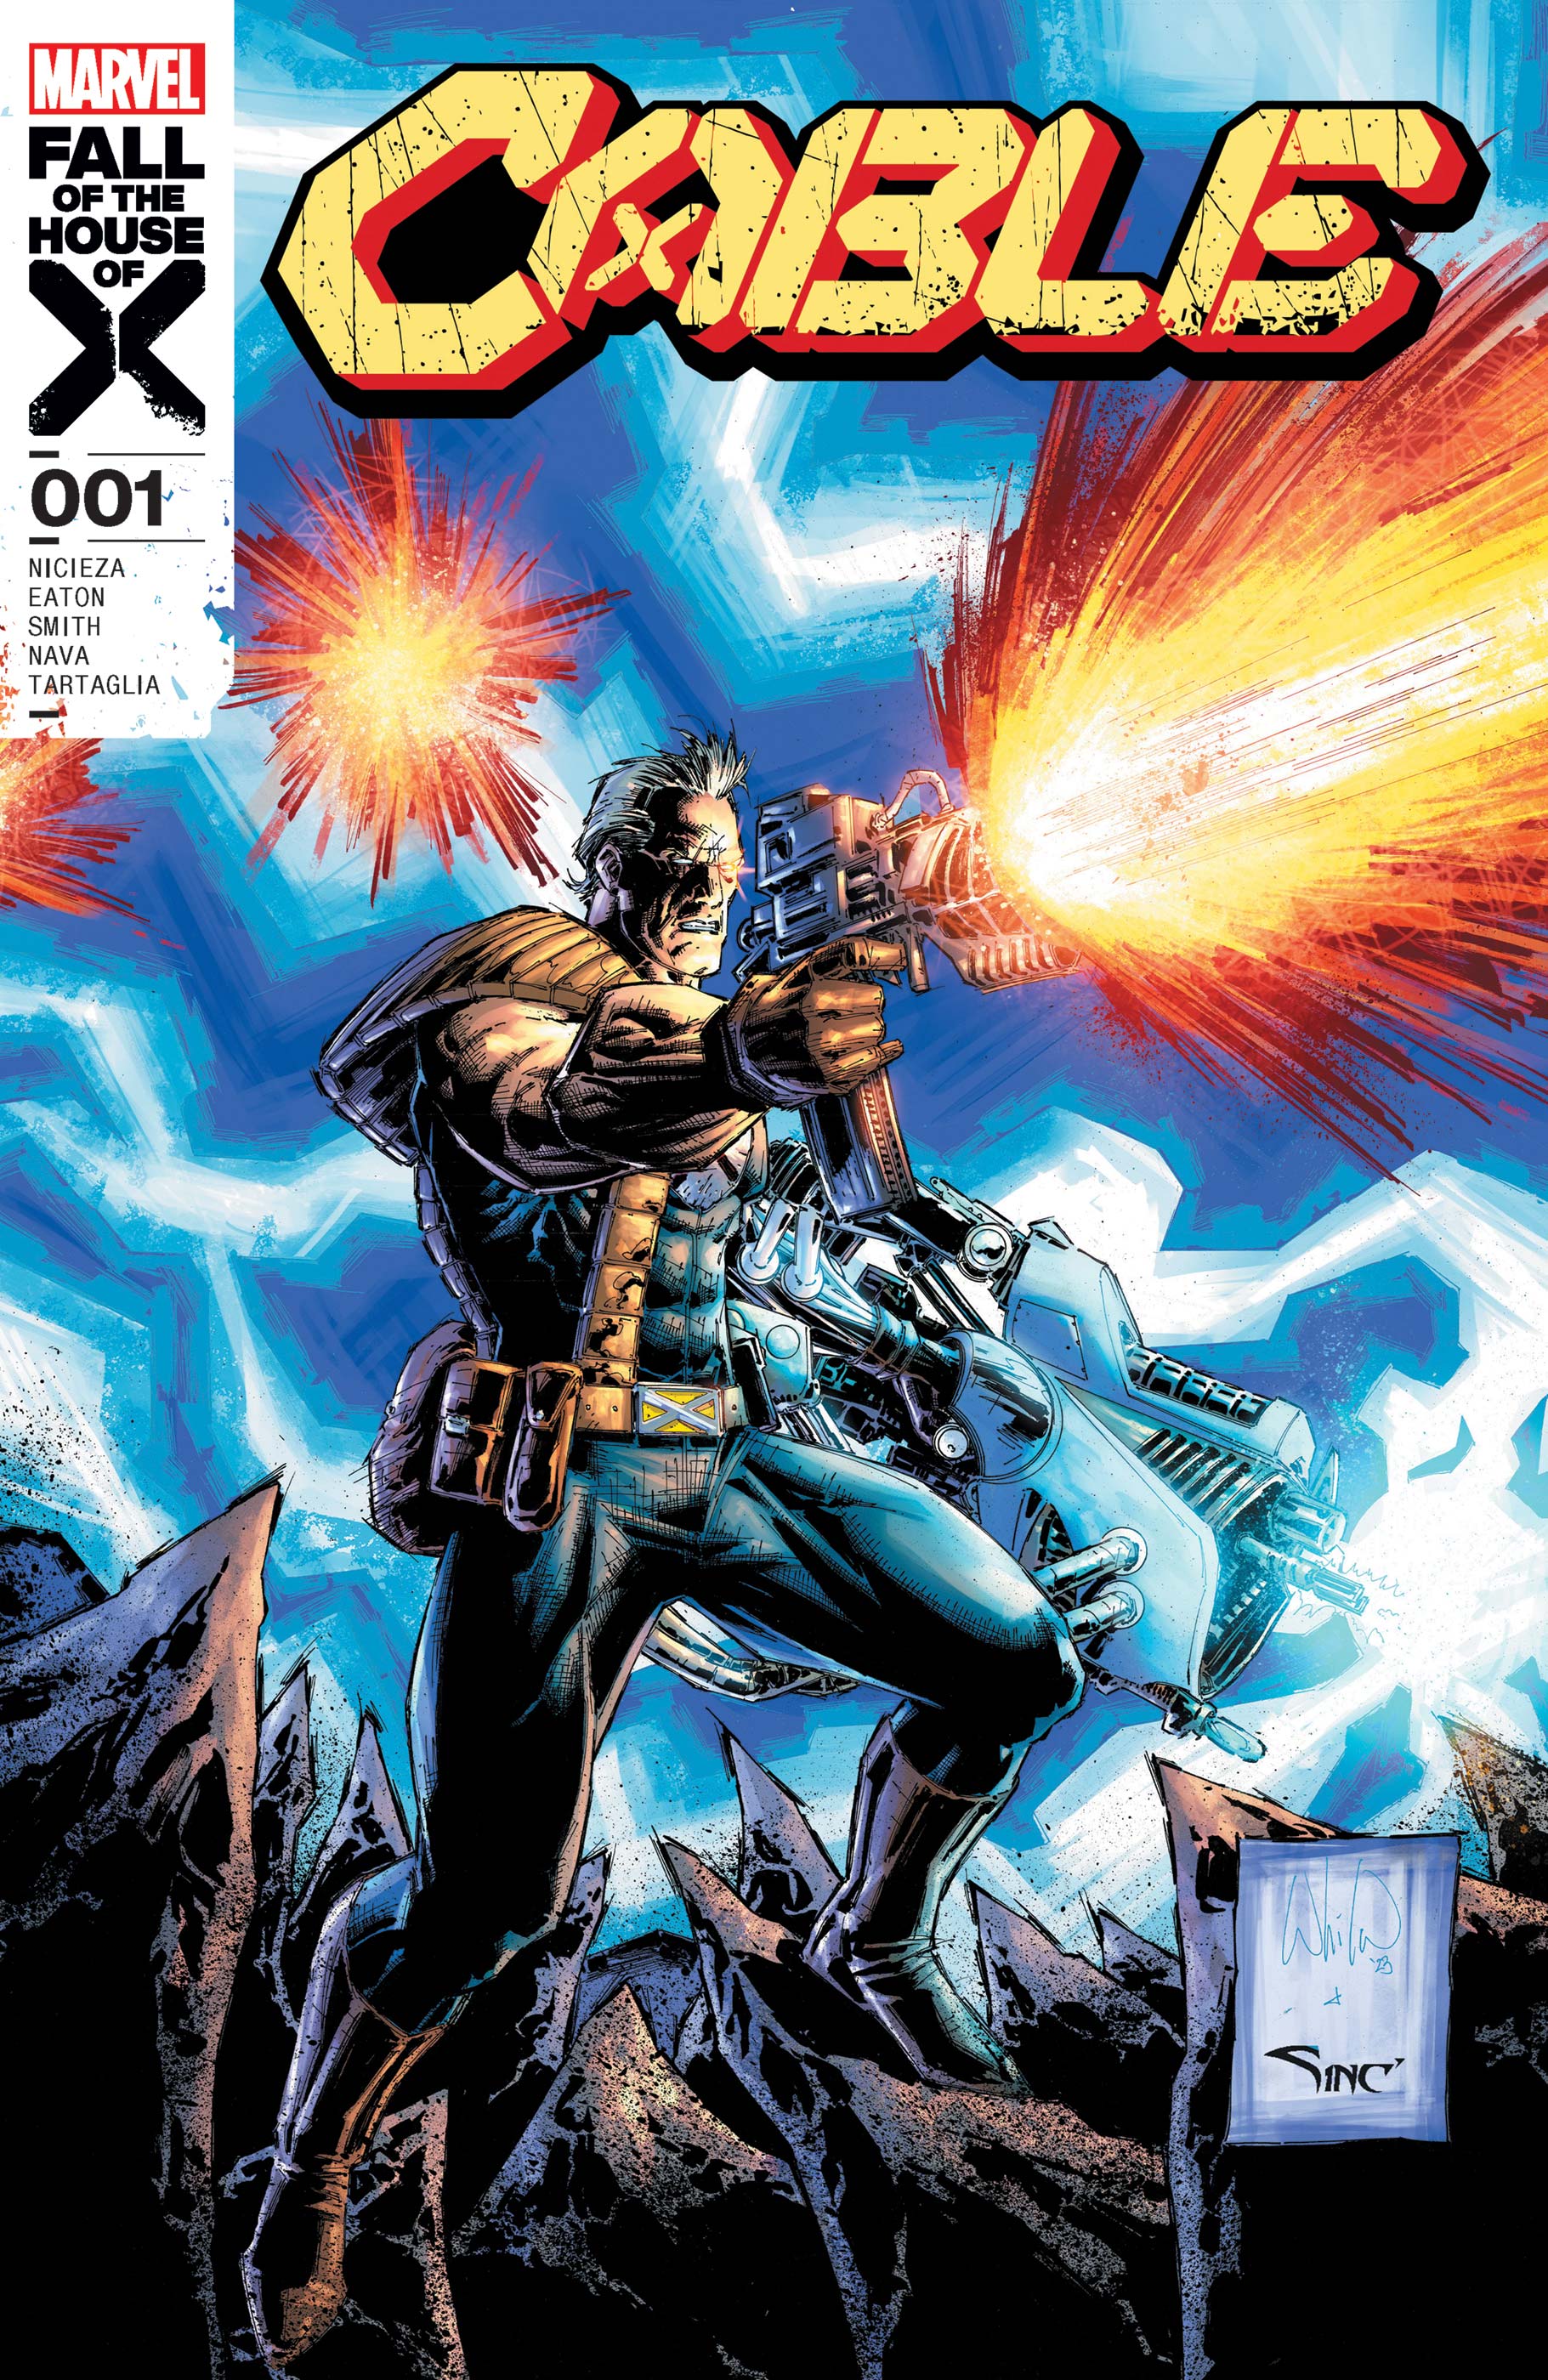 Cable (2024) #1